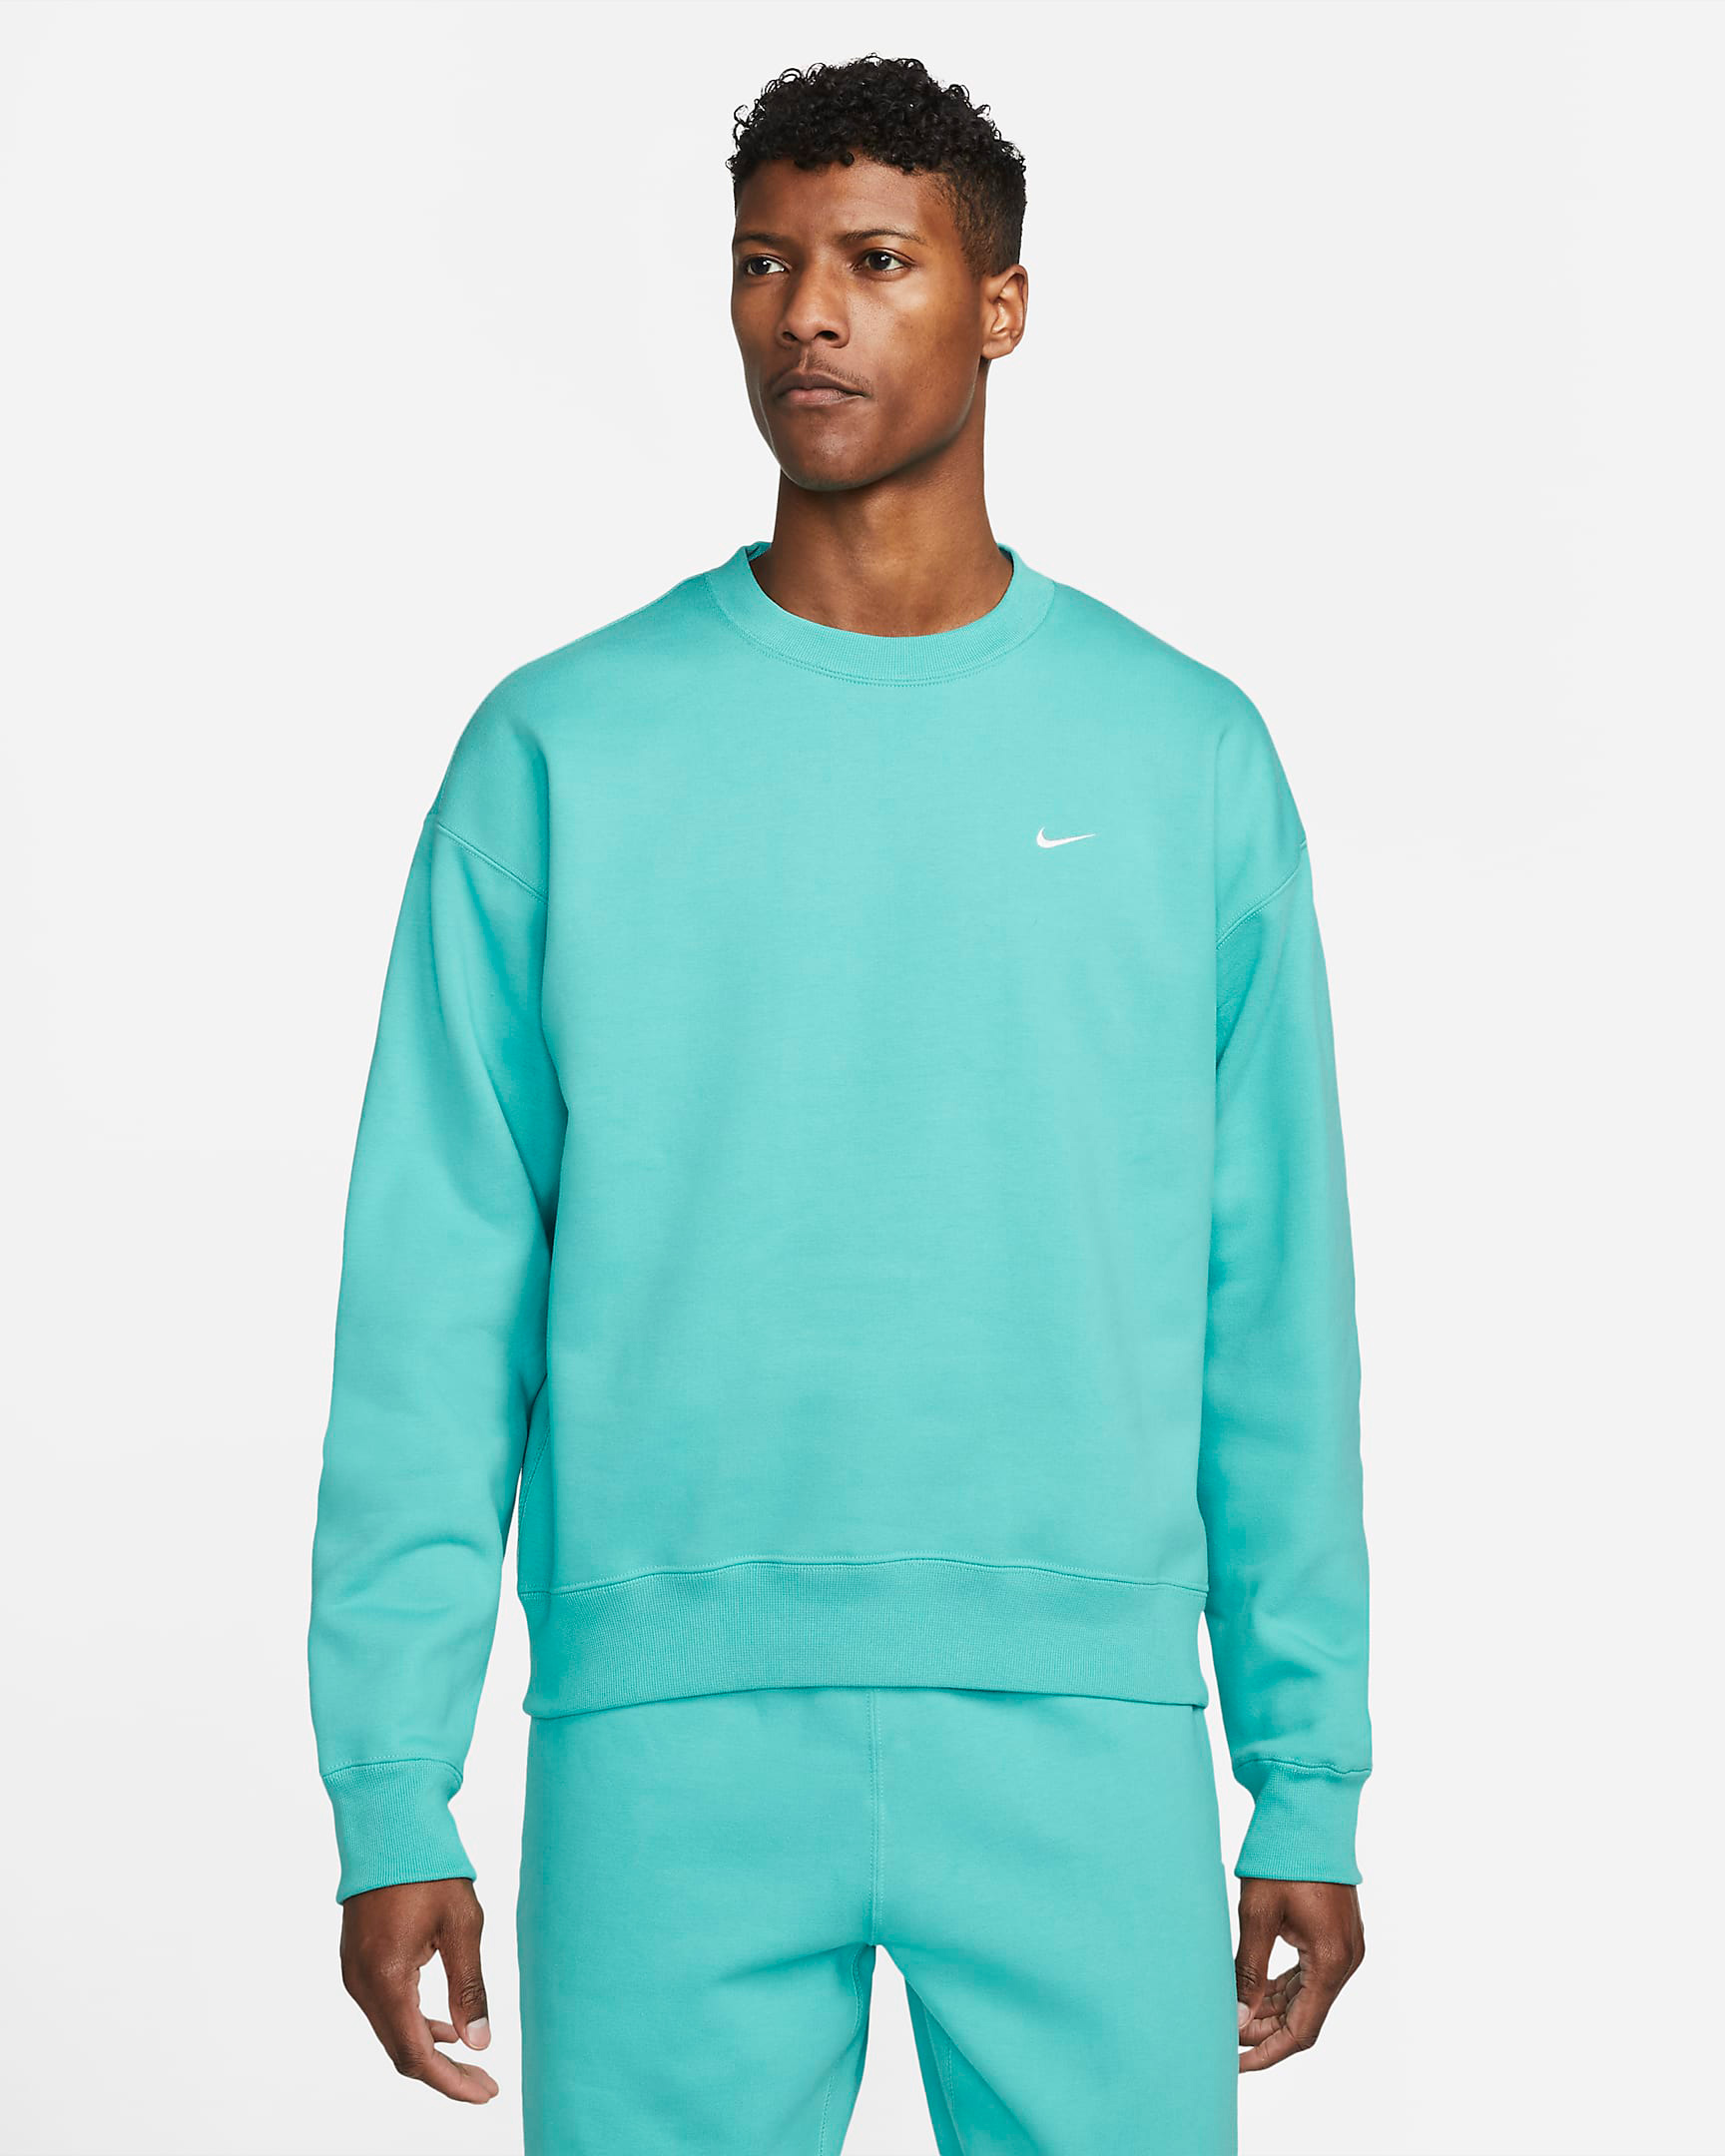 Nike Washed Teal Shirts Clothing and Sneakers